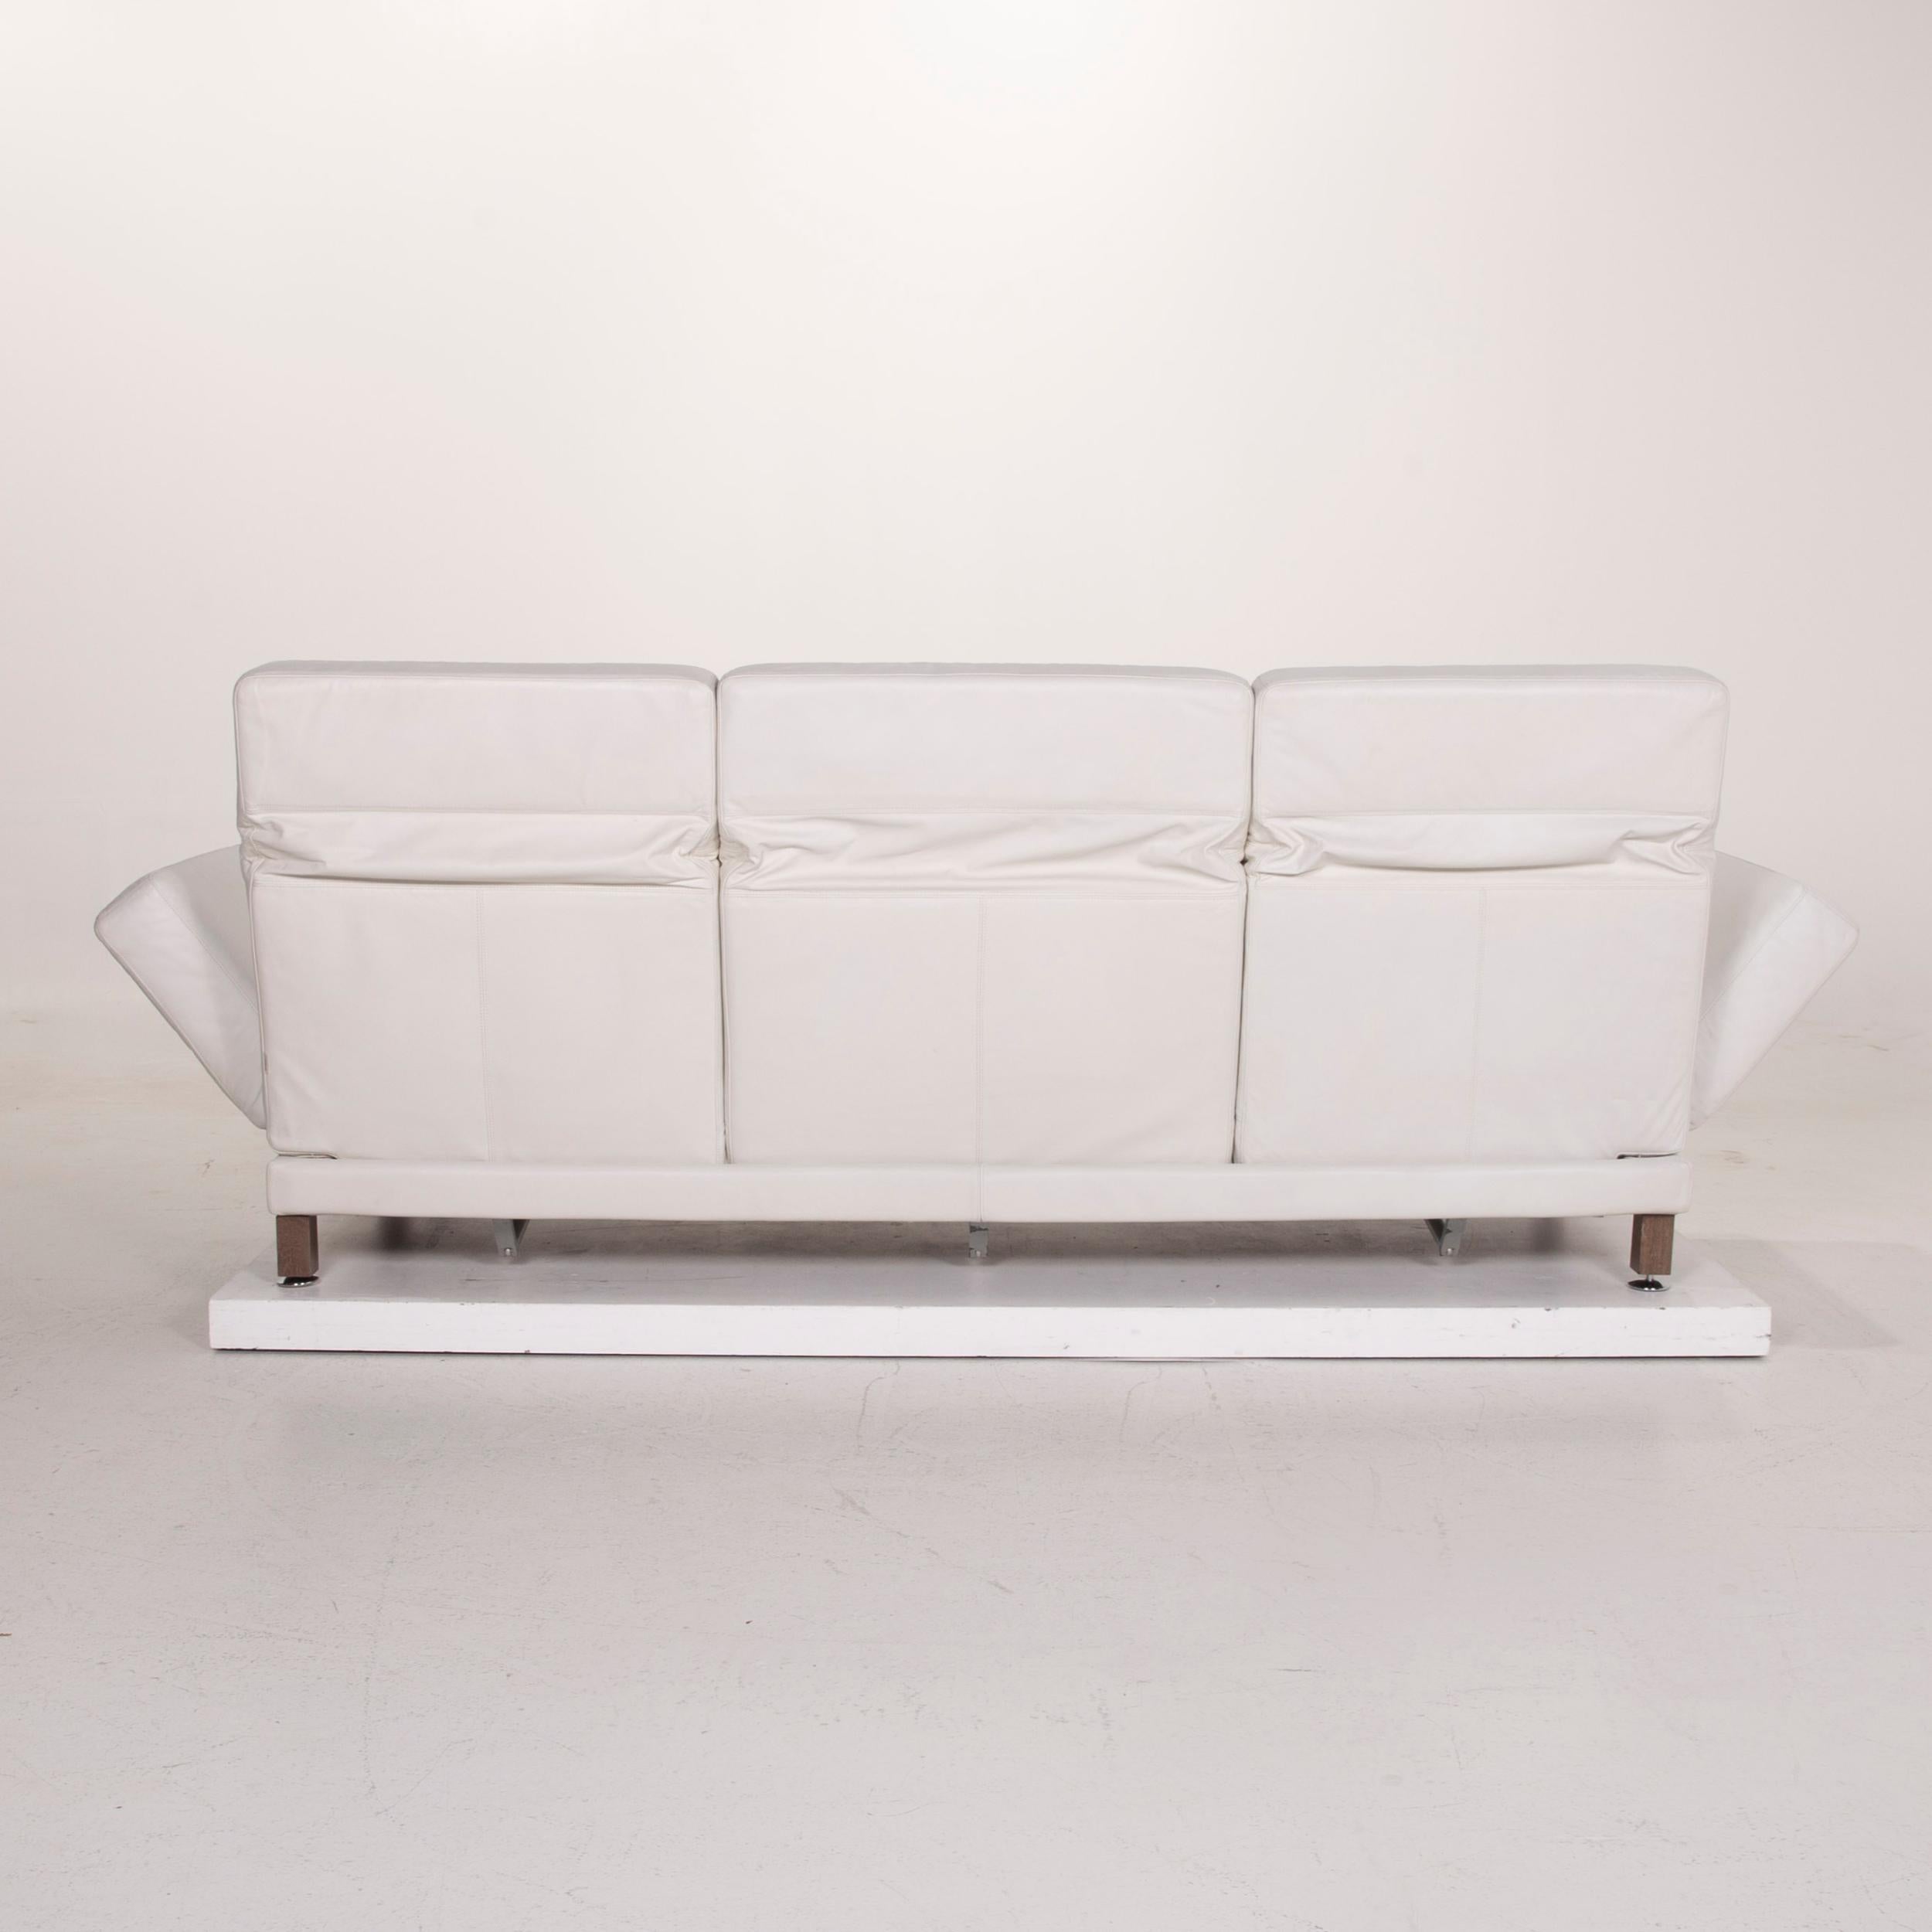 Brühl & Sippold Moule Leather Sofa Set White Three-Seater Relax Function Stool For Sale 11